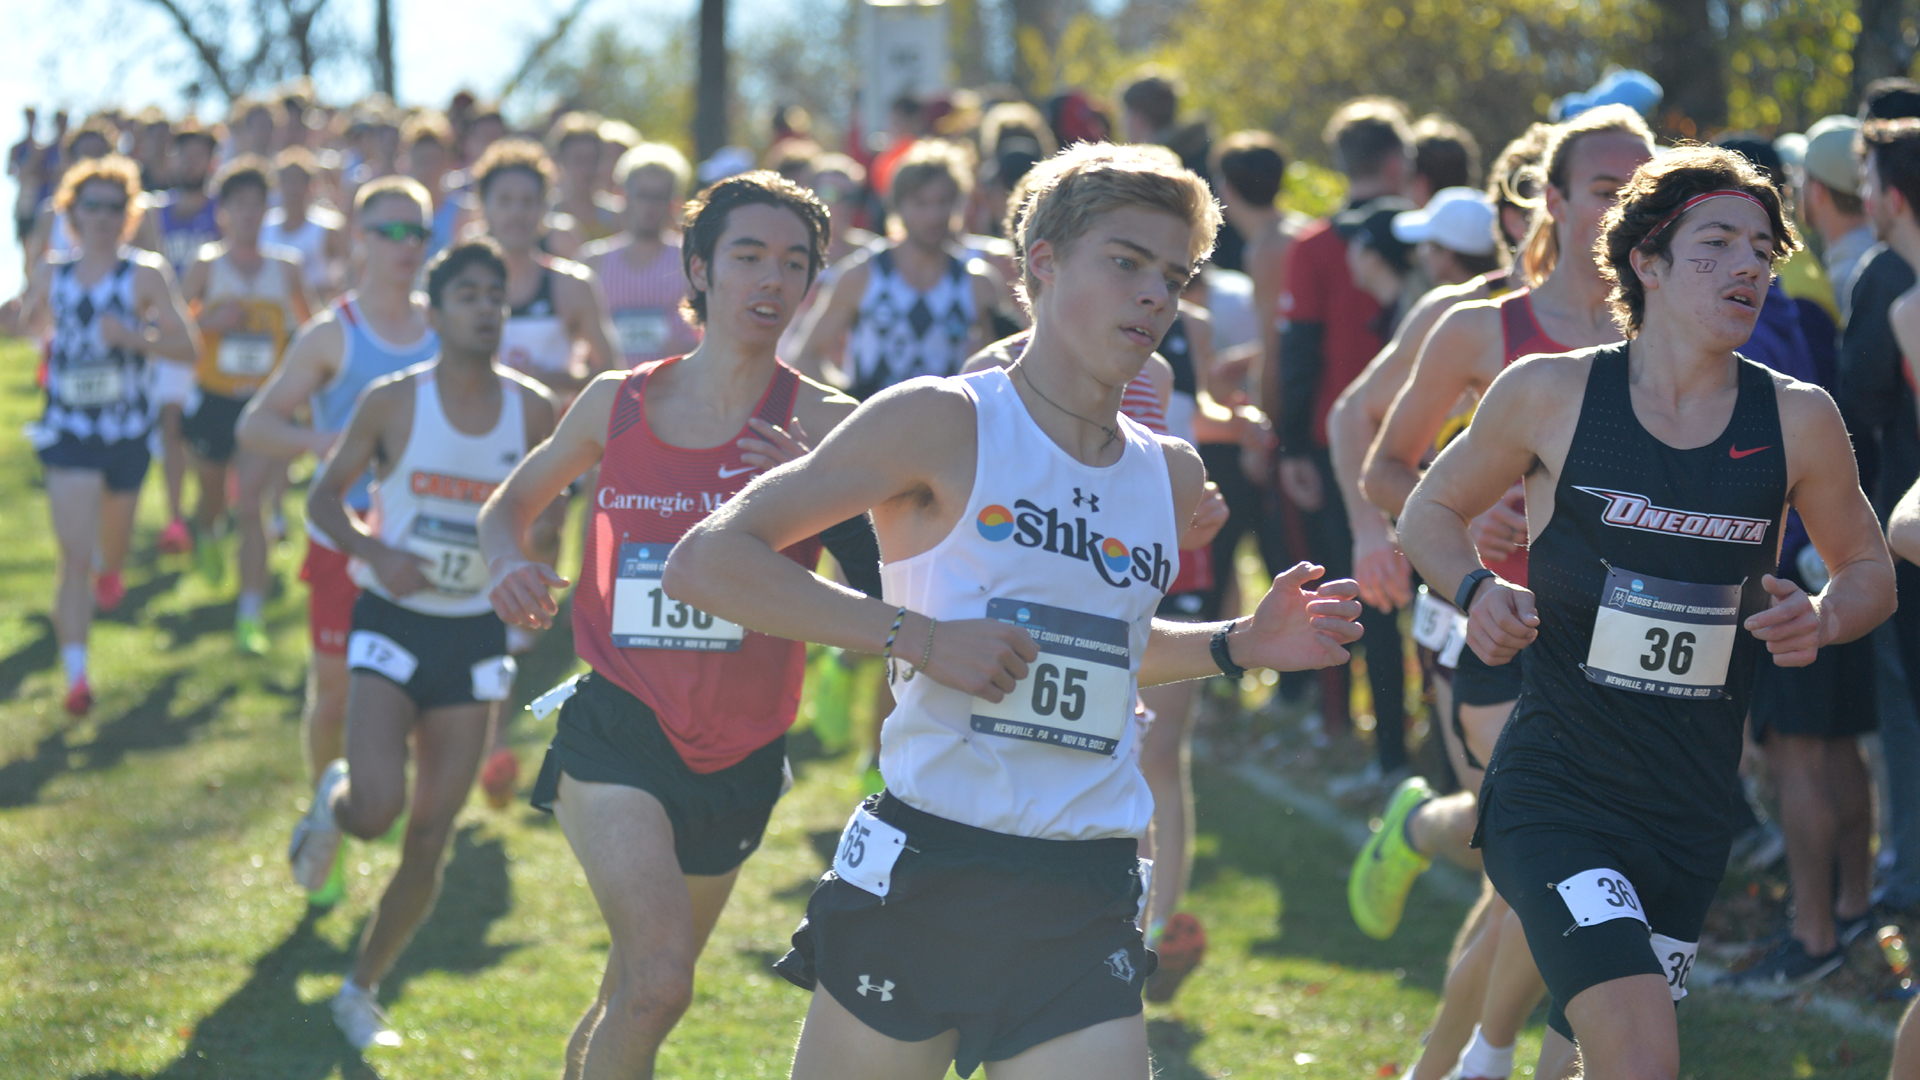 Cameron Cullen finished 135th with a time of 25:56.0 at the NCAA Championship on Saturday